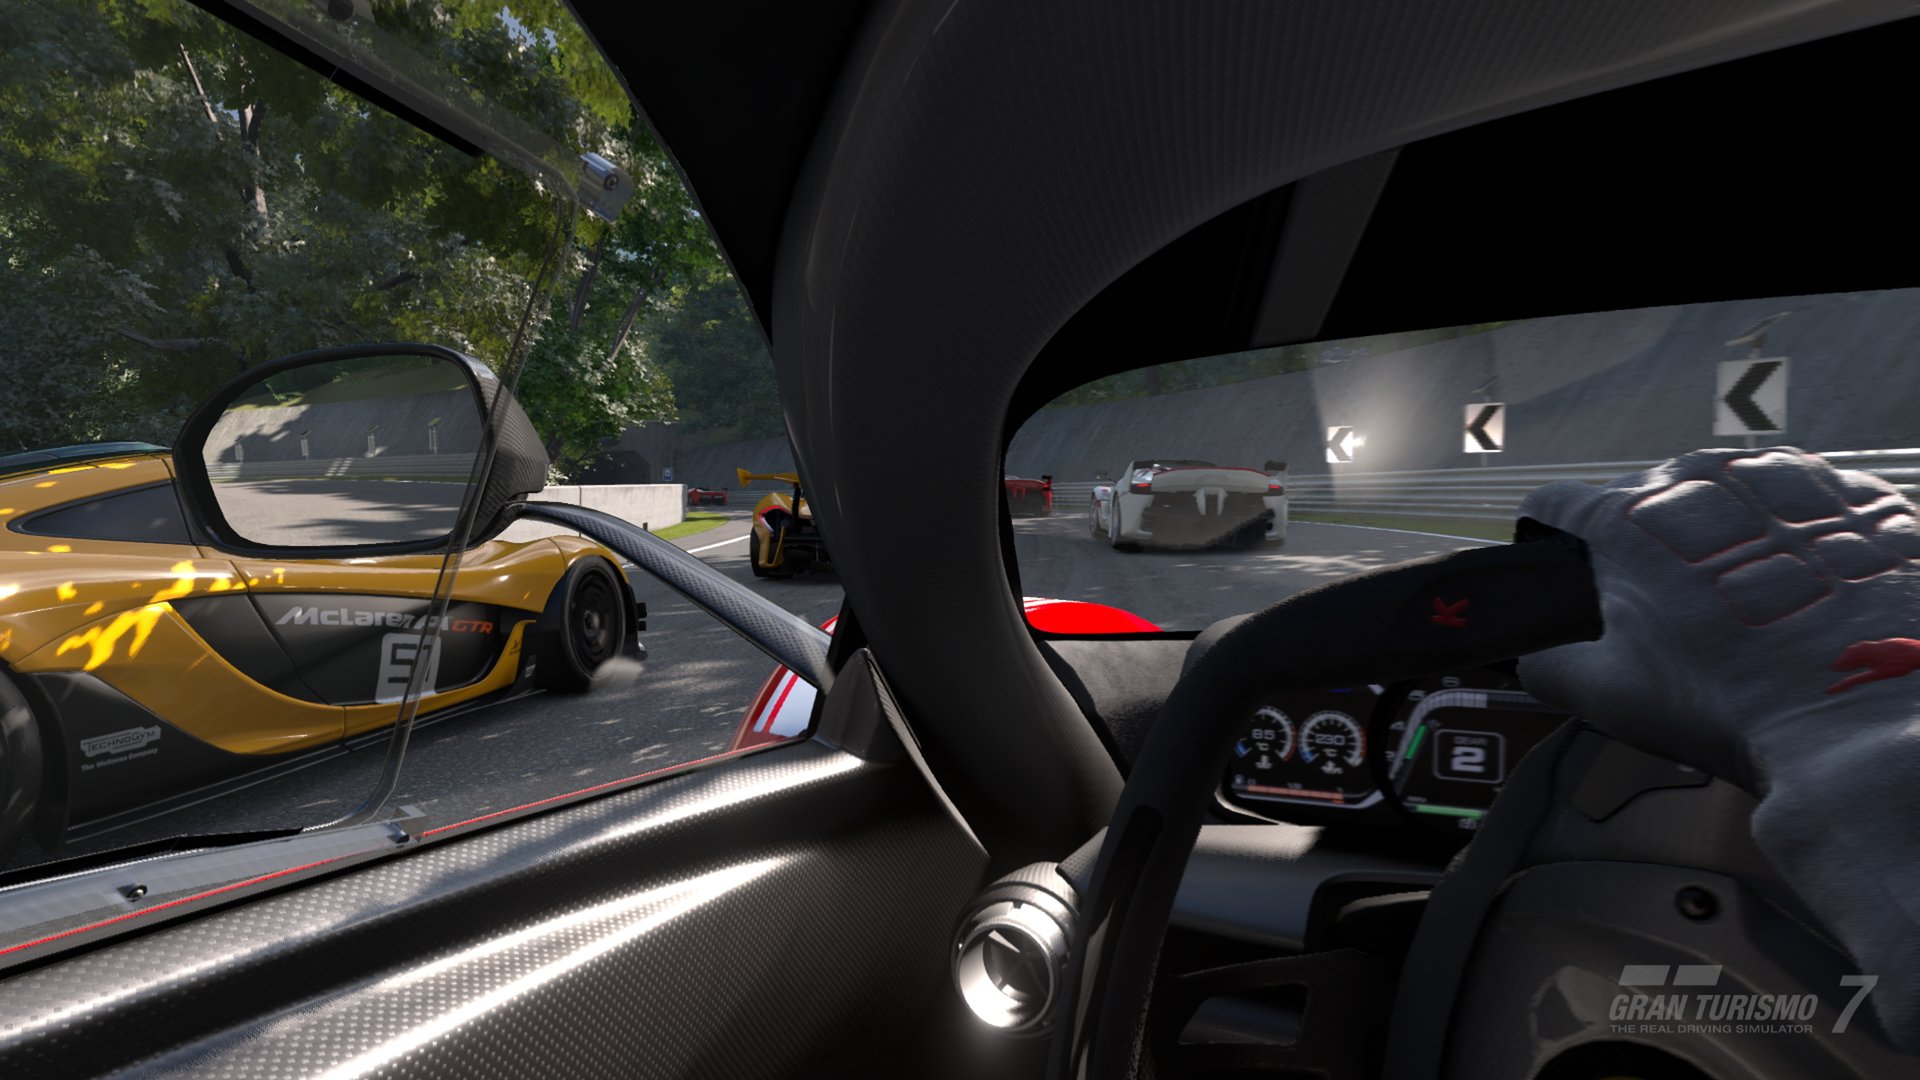 Gran Turismo 7 VR Coming To PSVR2 At Launch Through A Free Upgrade -  PlayStation Universe